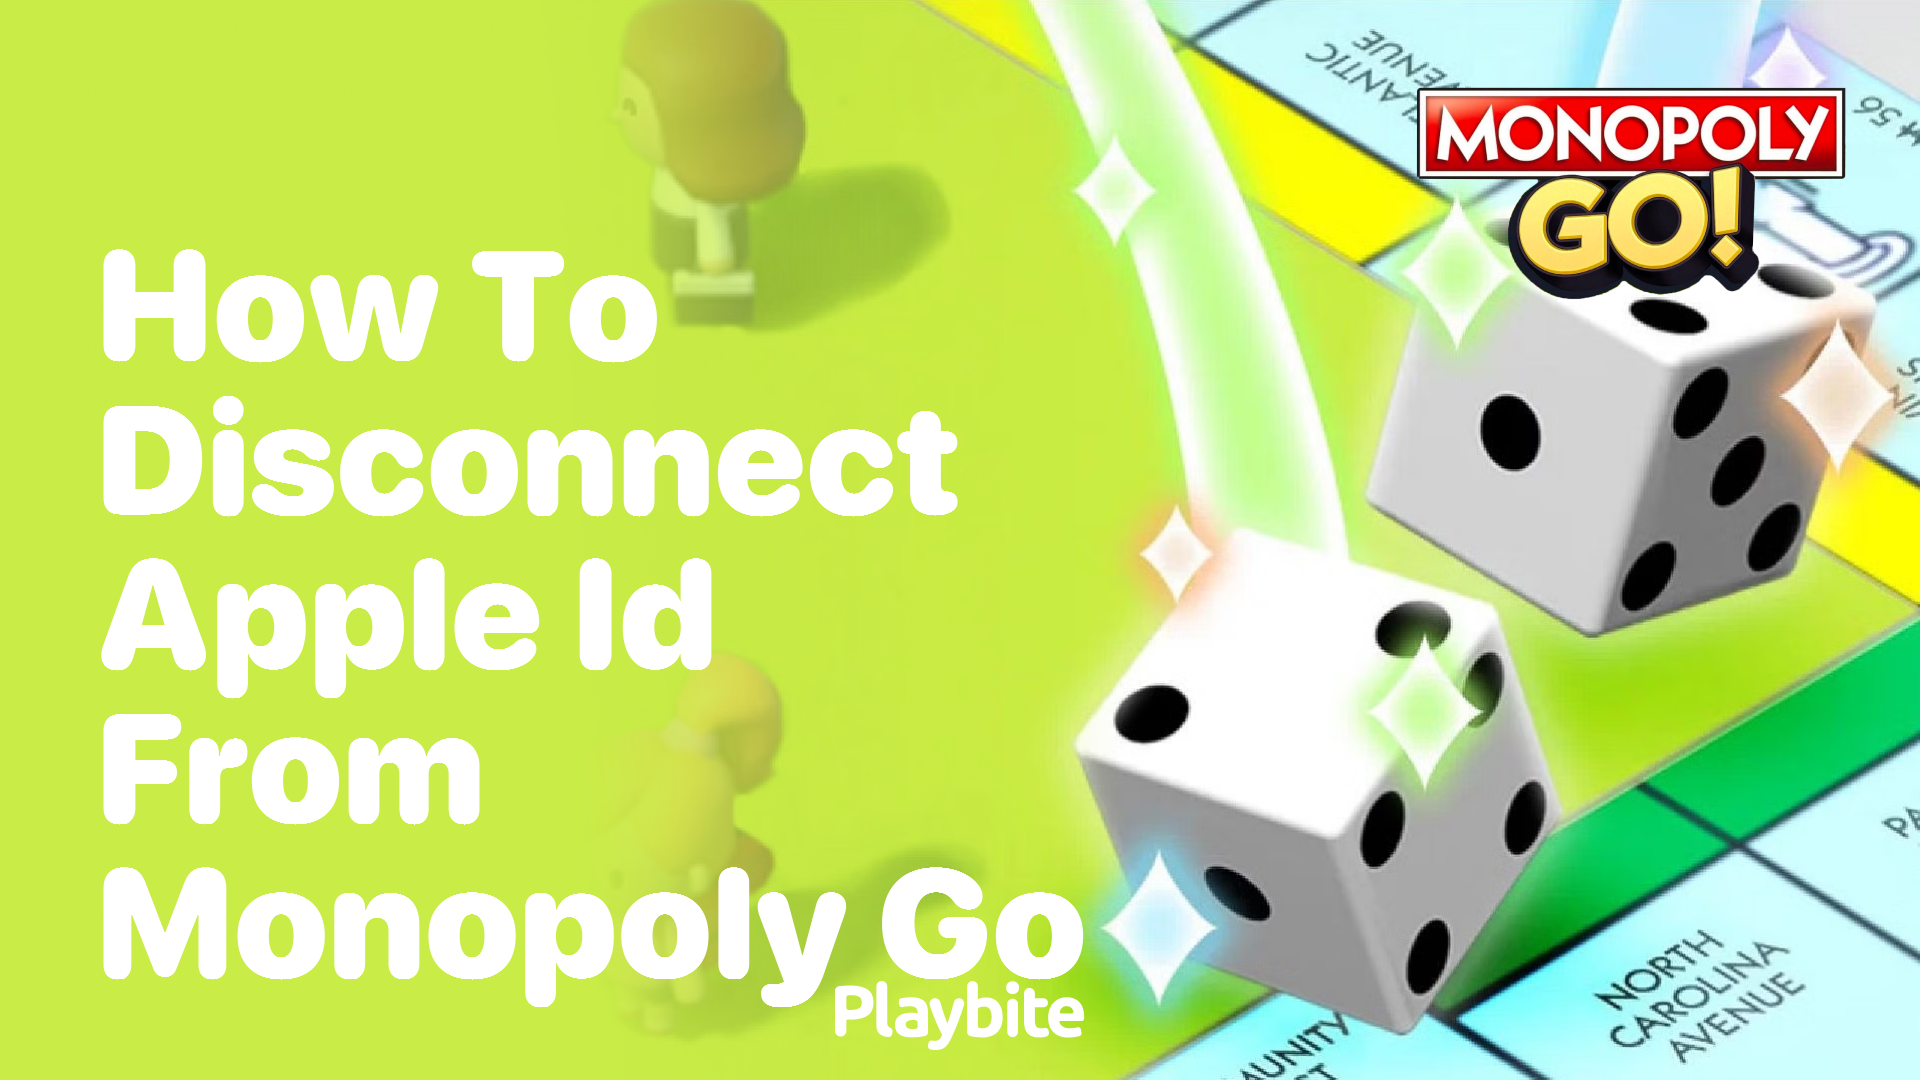 How to Disconnect Apple ID from Monopoly Go: A Simple Guide